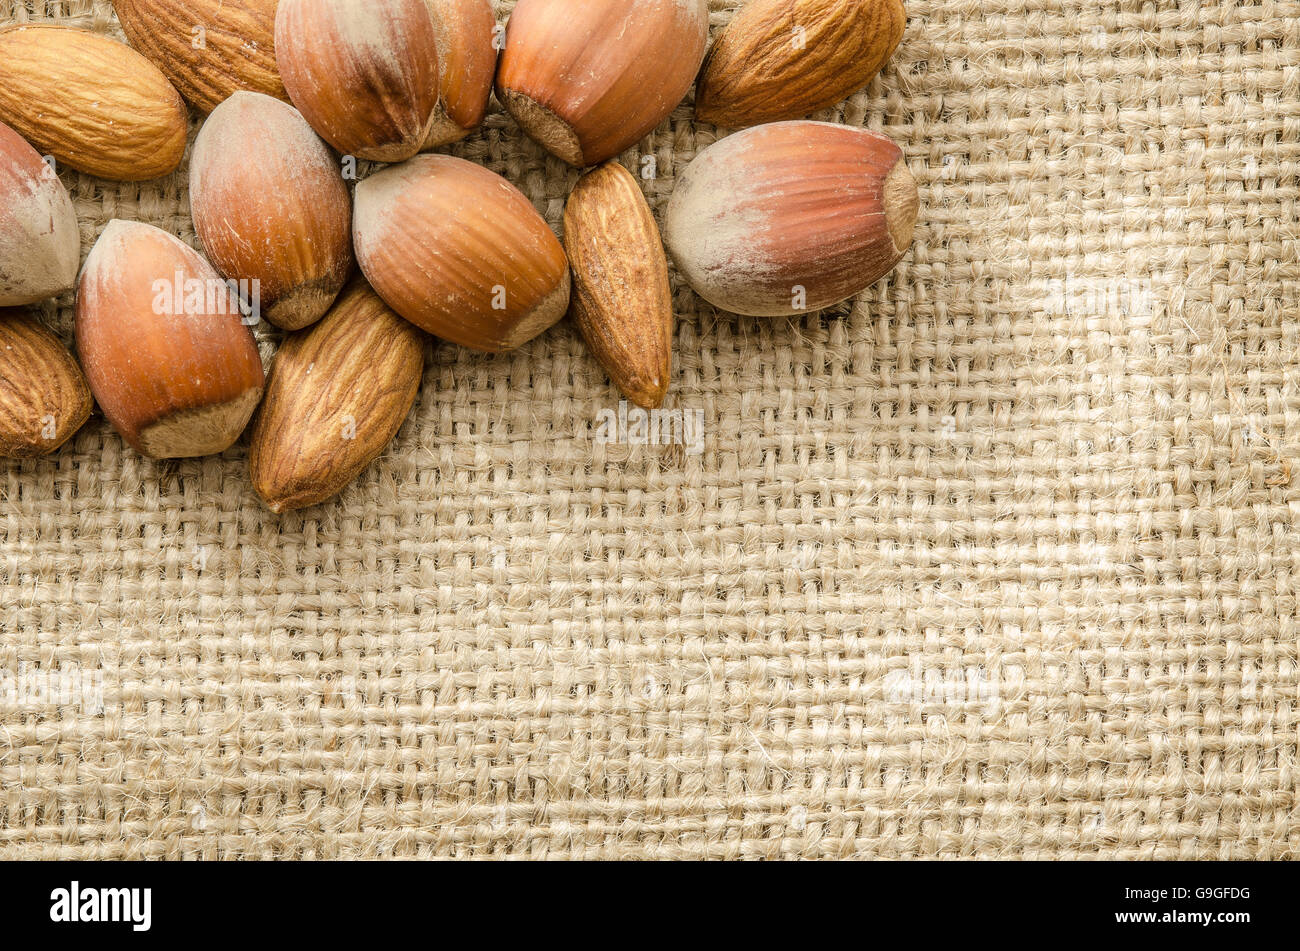 Almonds and hazelnuts isolated on bagging Stock Photo